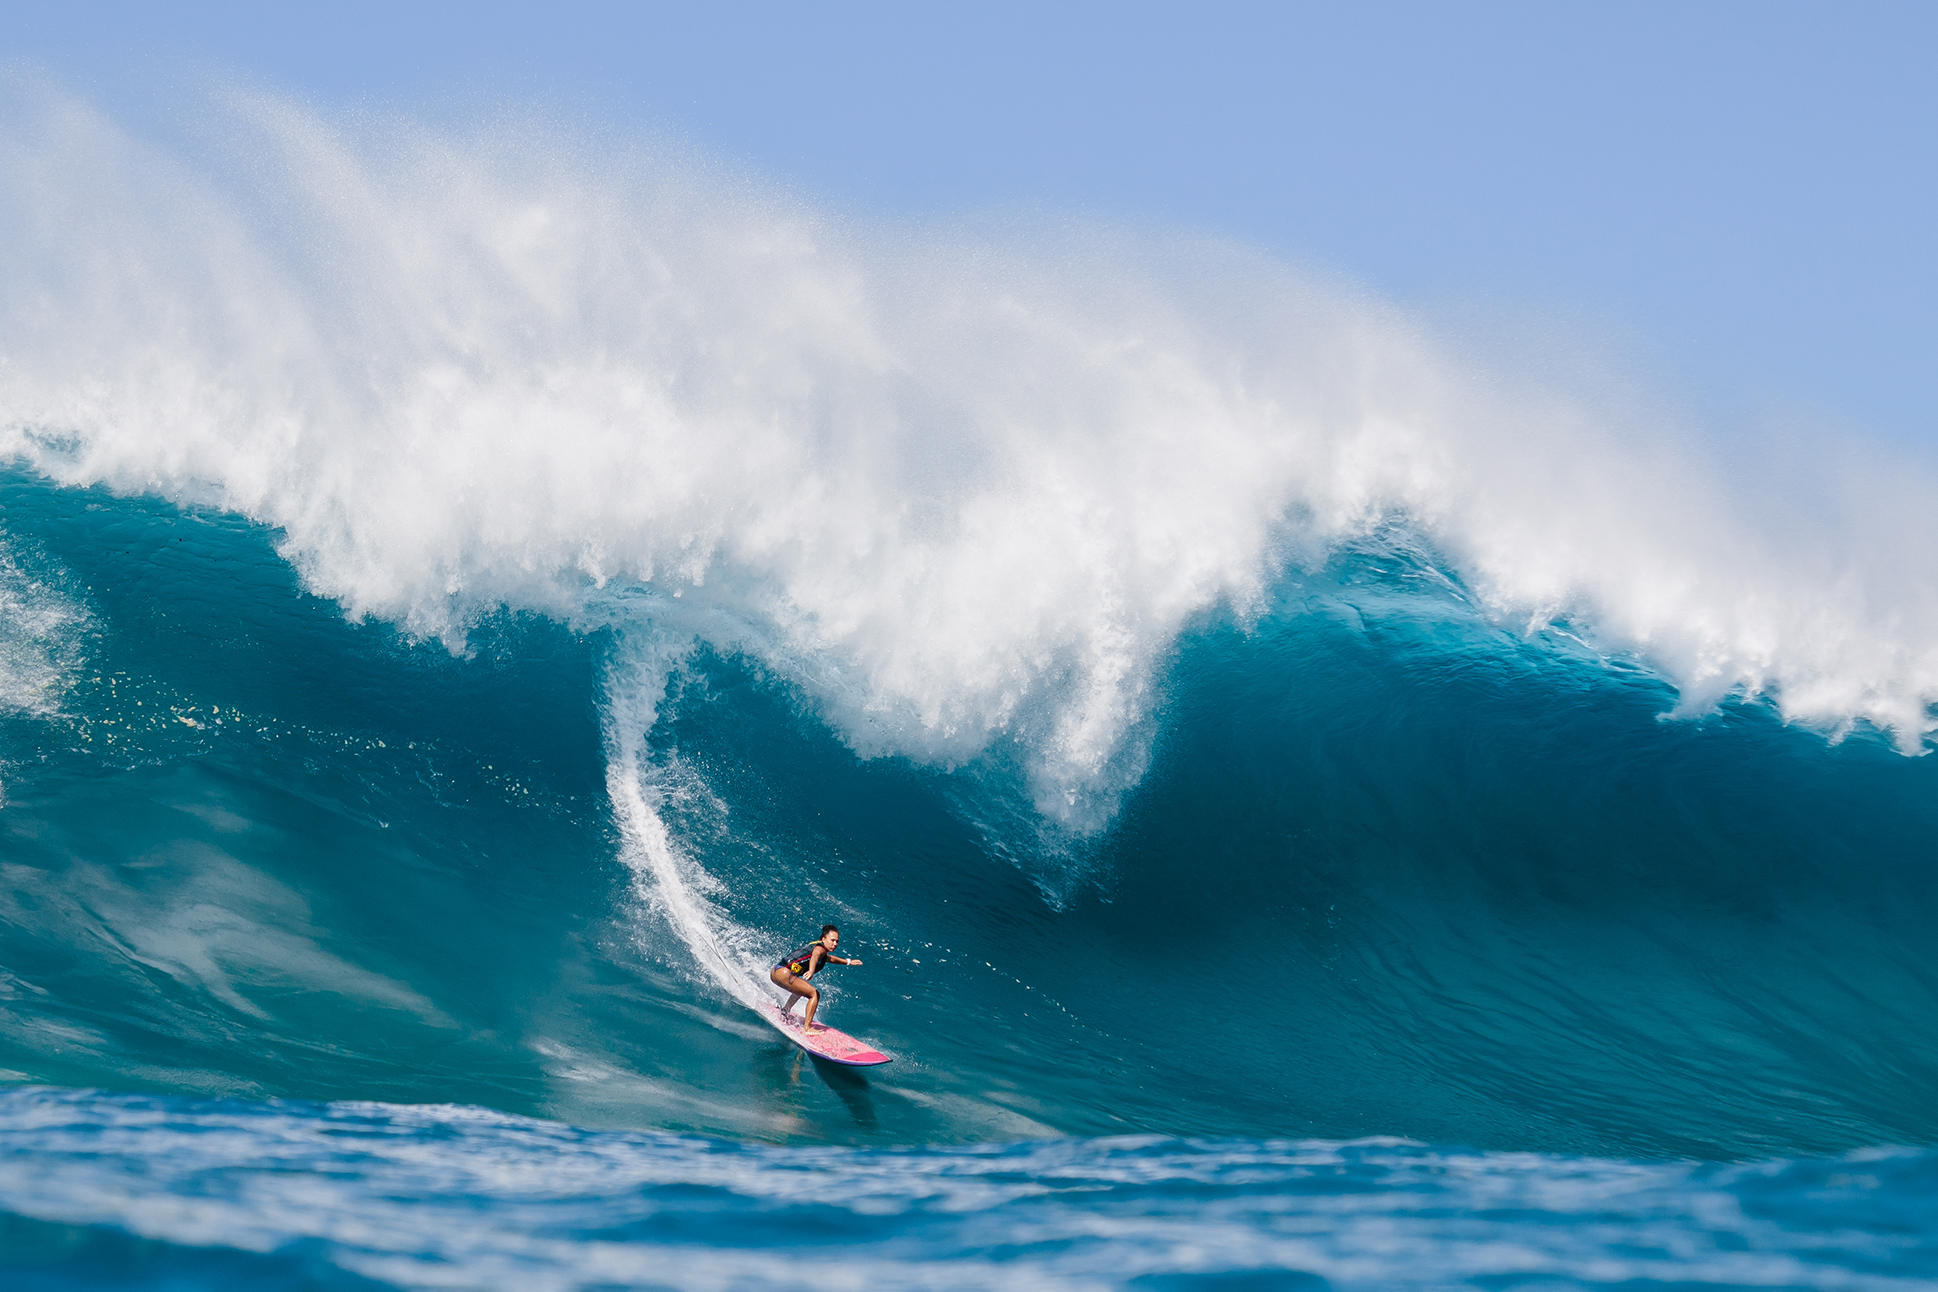 female surfer riding massive wave in Hawaii